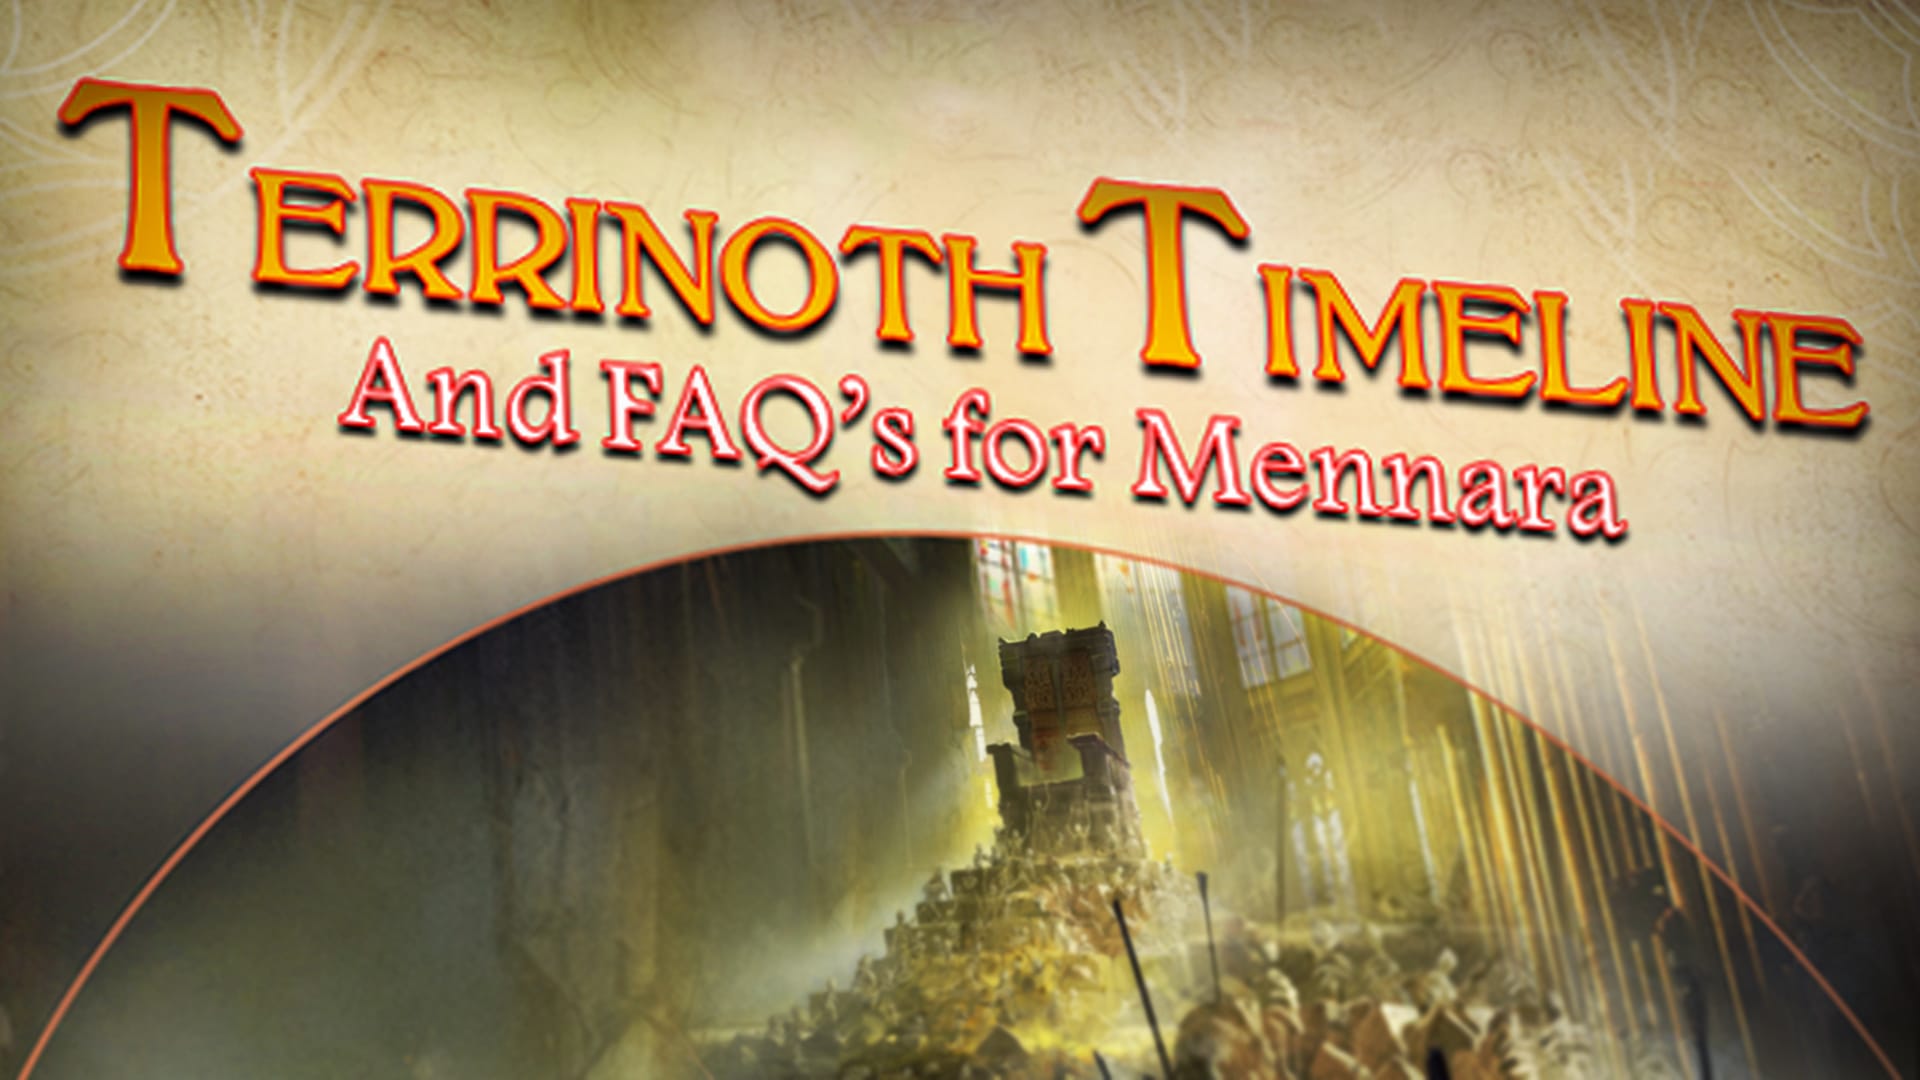 Terrinoth Timeline cover 03